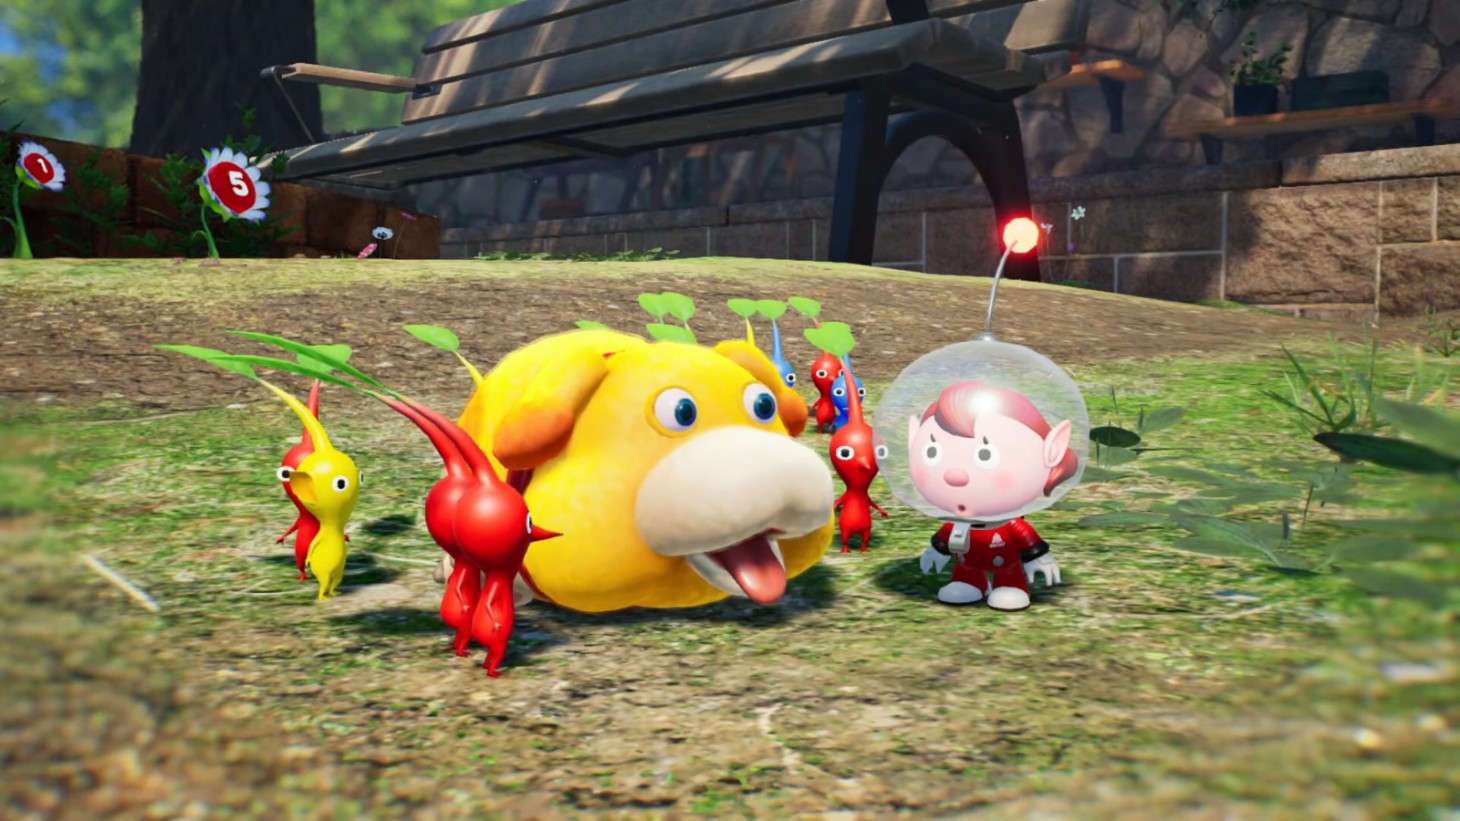 The protagonist converses with several pikmin and a yellow dog in Pikmin 4